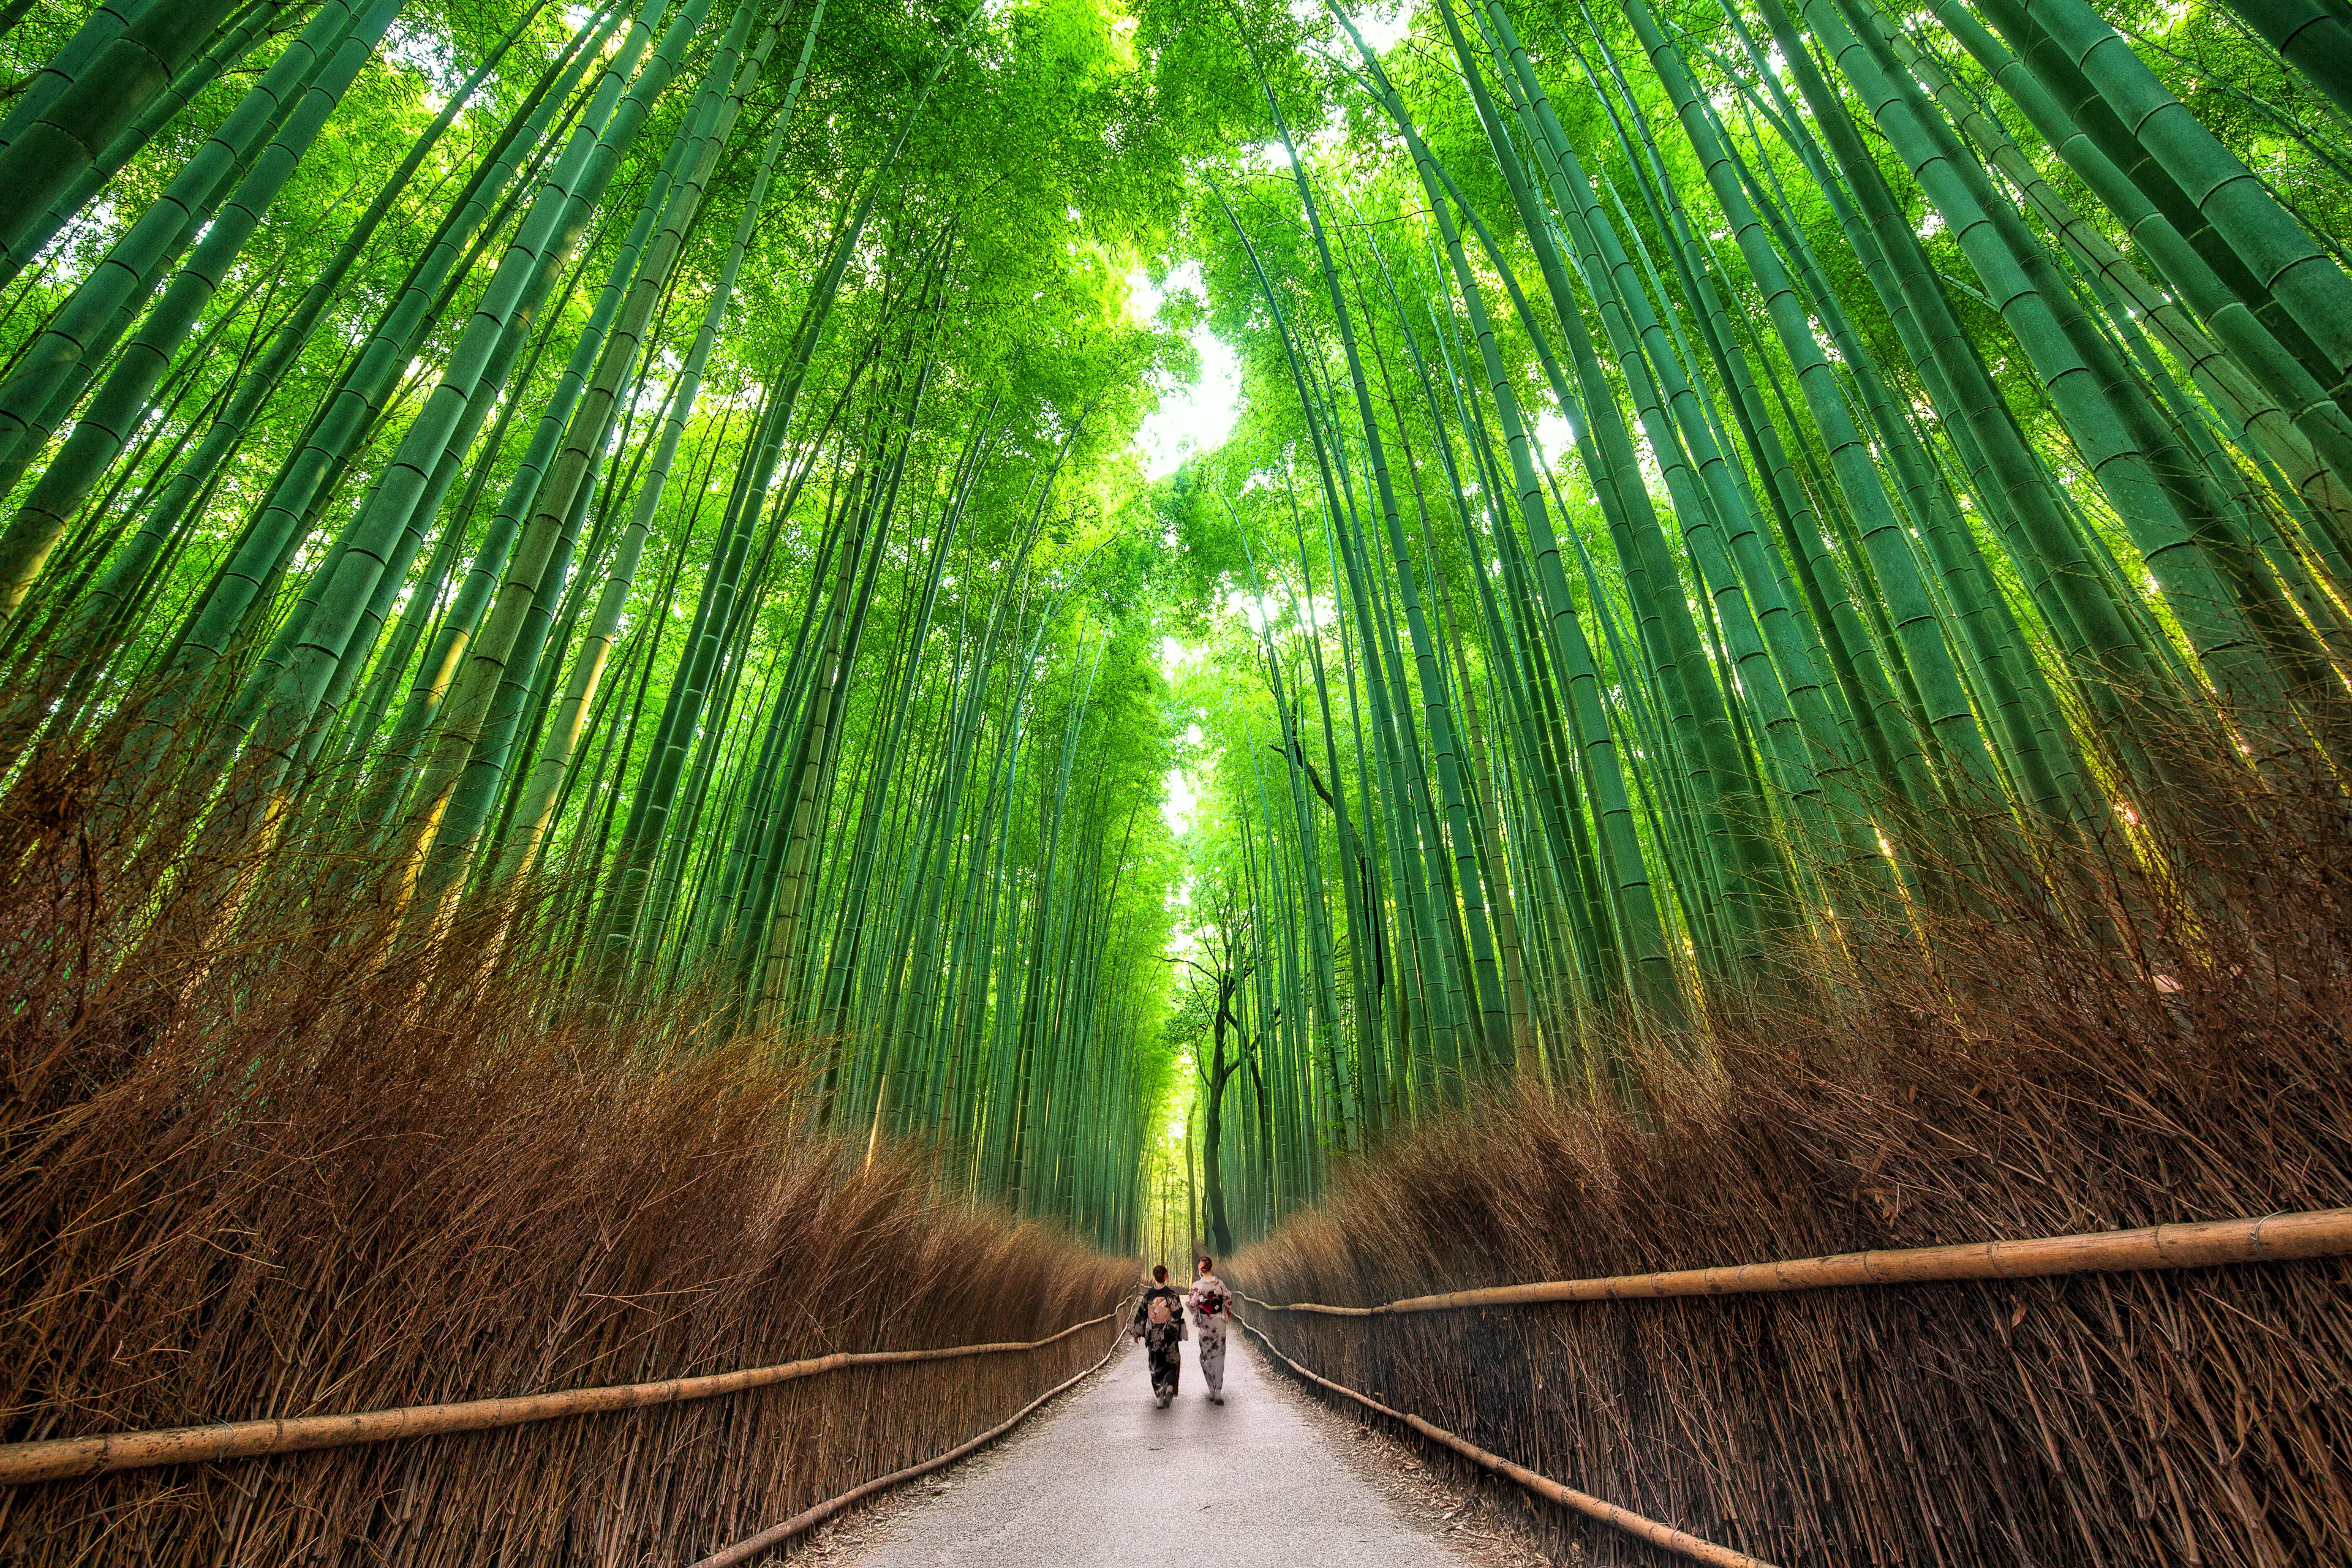 3-Day Kyoto Adventure: Unseen Paths, Shopping & Relaxation with Friends